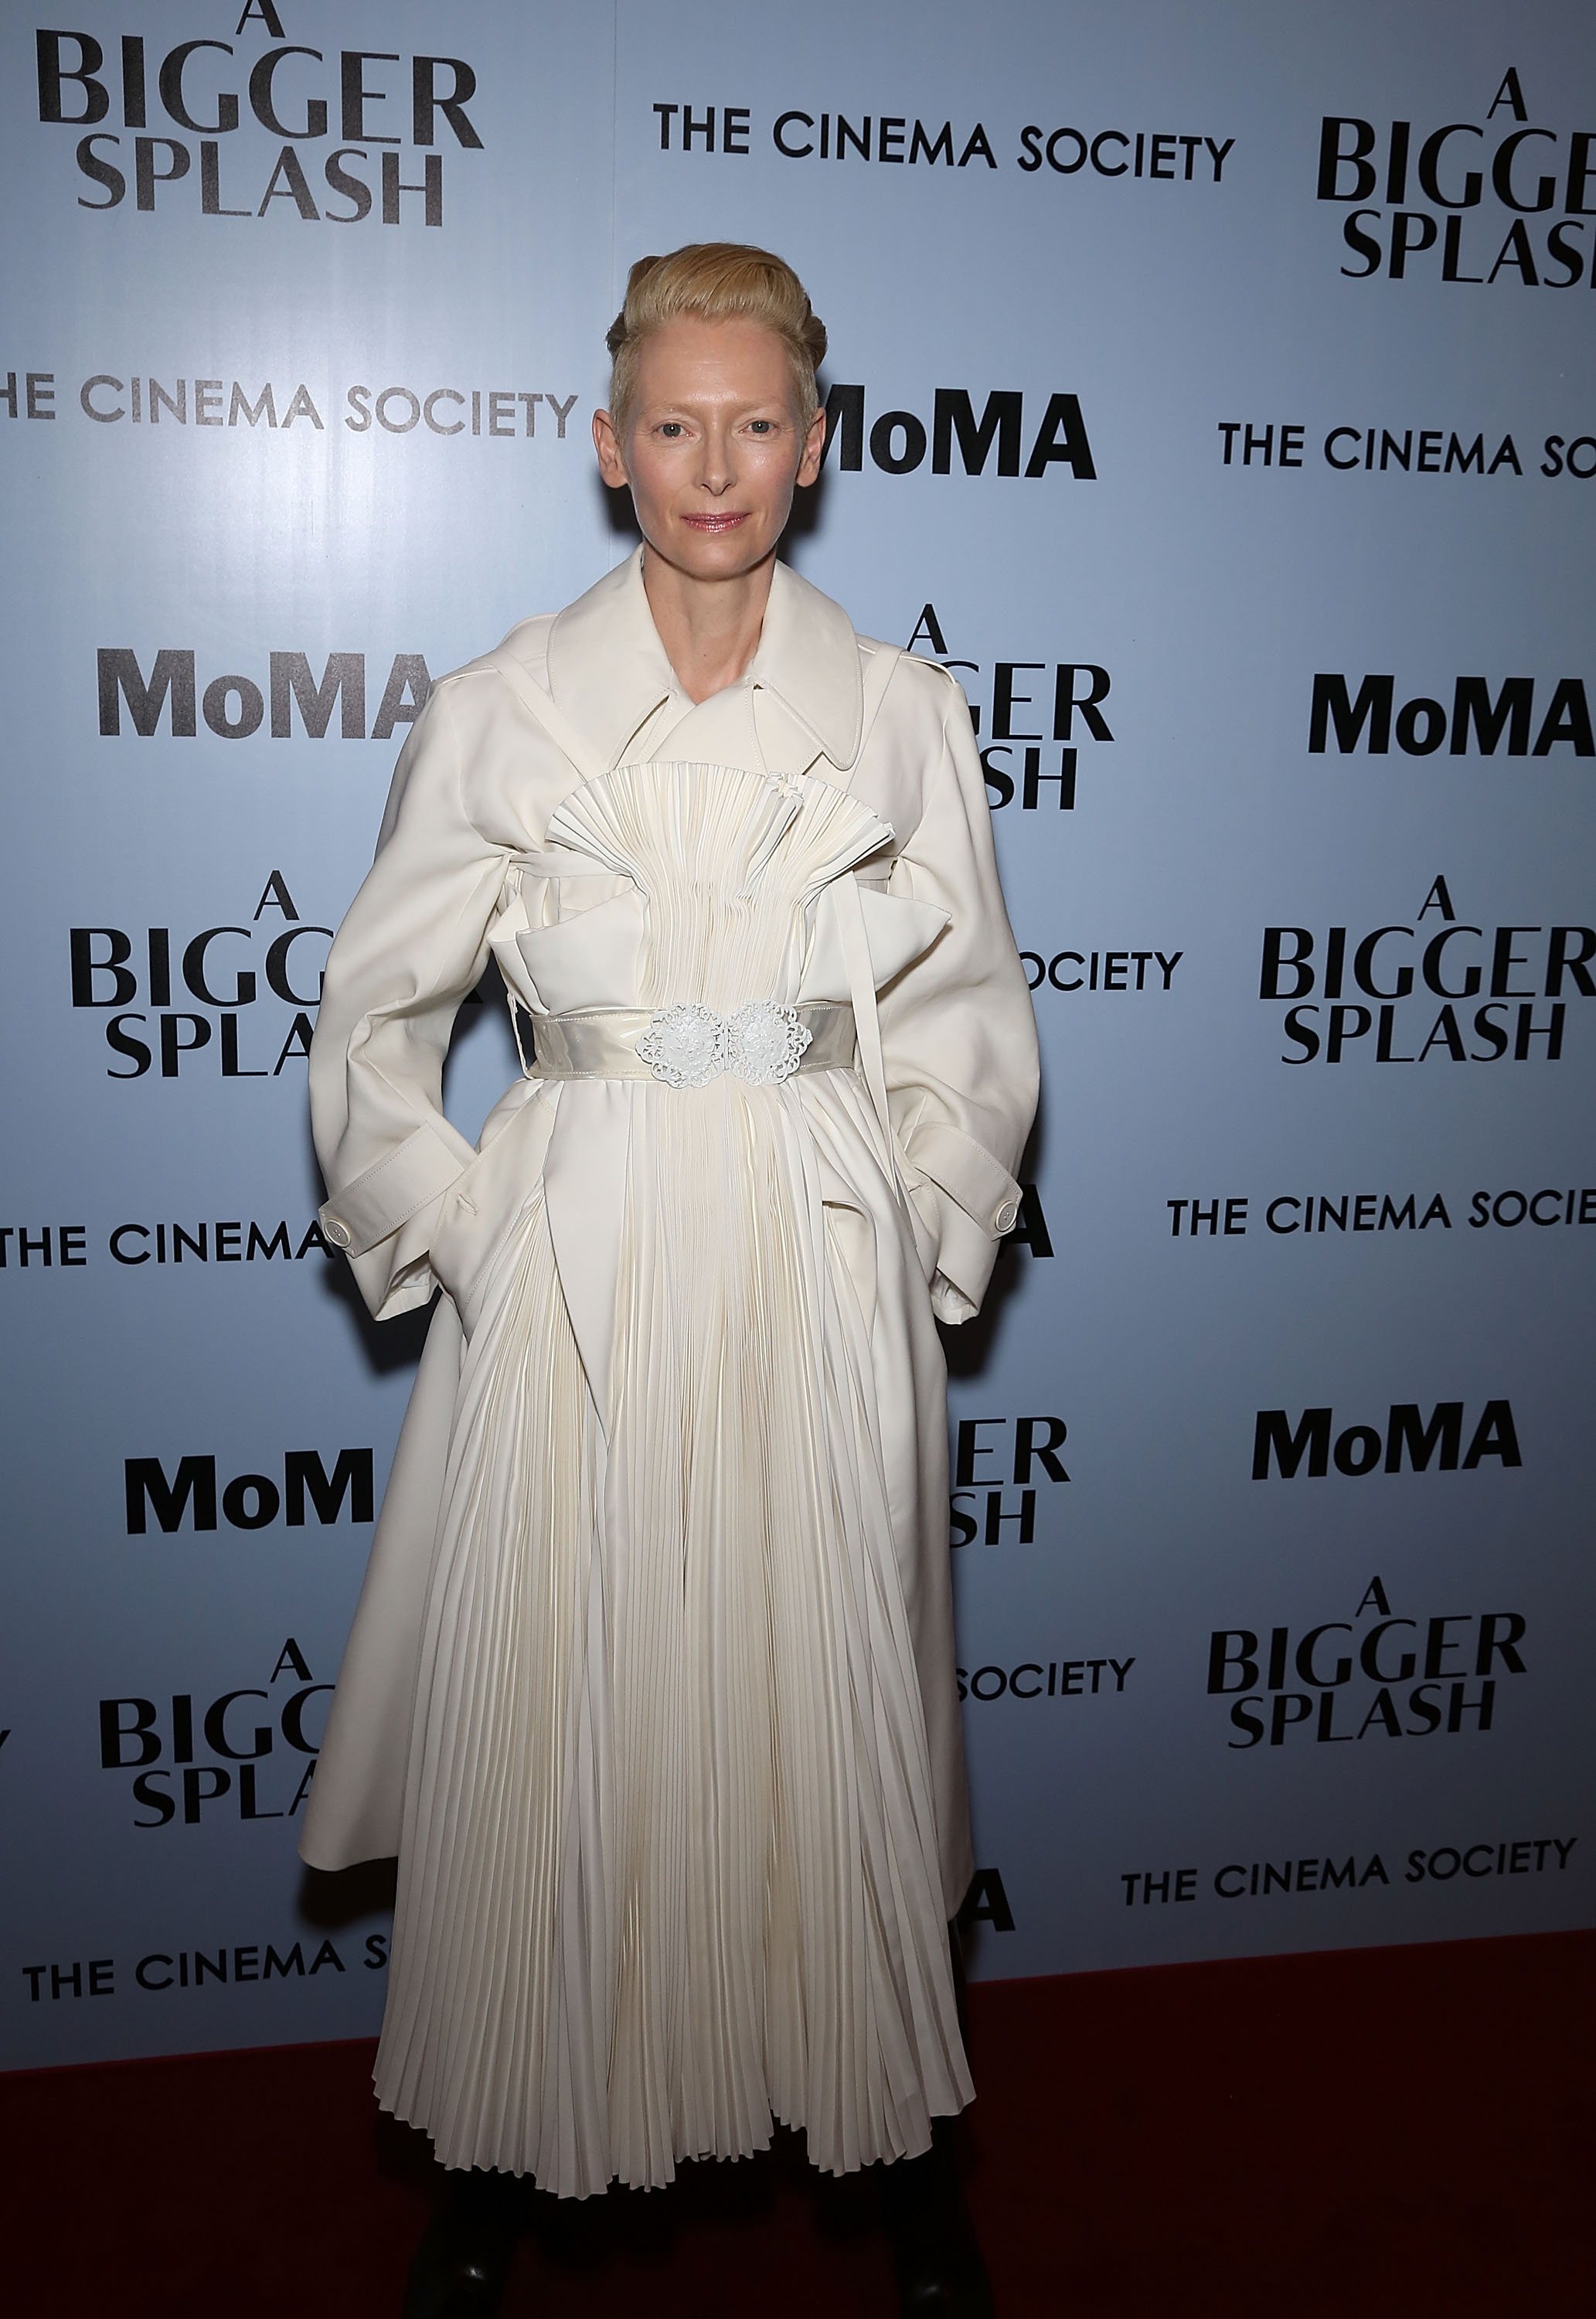 Fox Searchlight Pictures With The Cinema Society Host A Screening Of &quot;A Bigger Splash&quot;